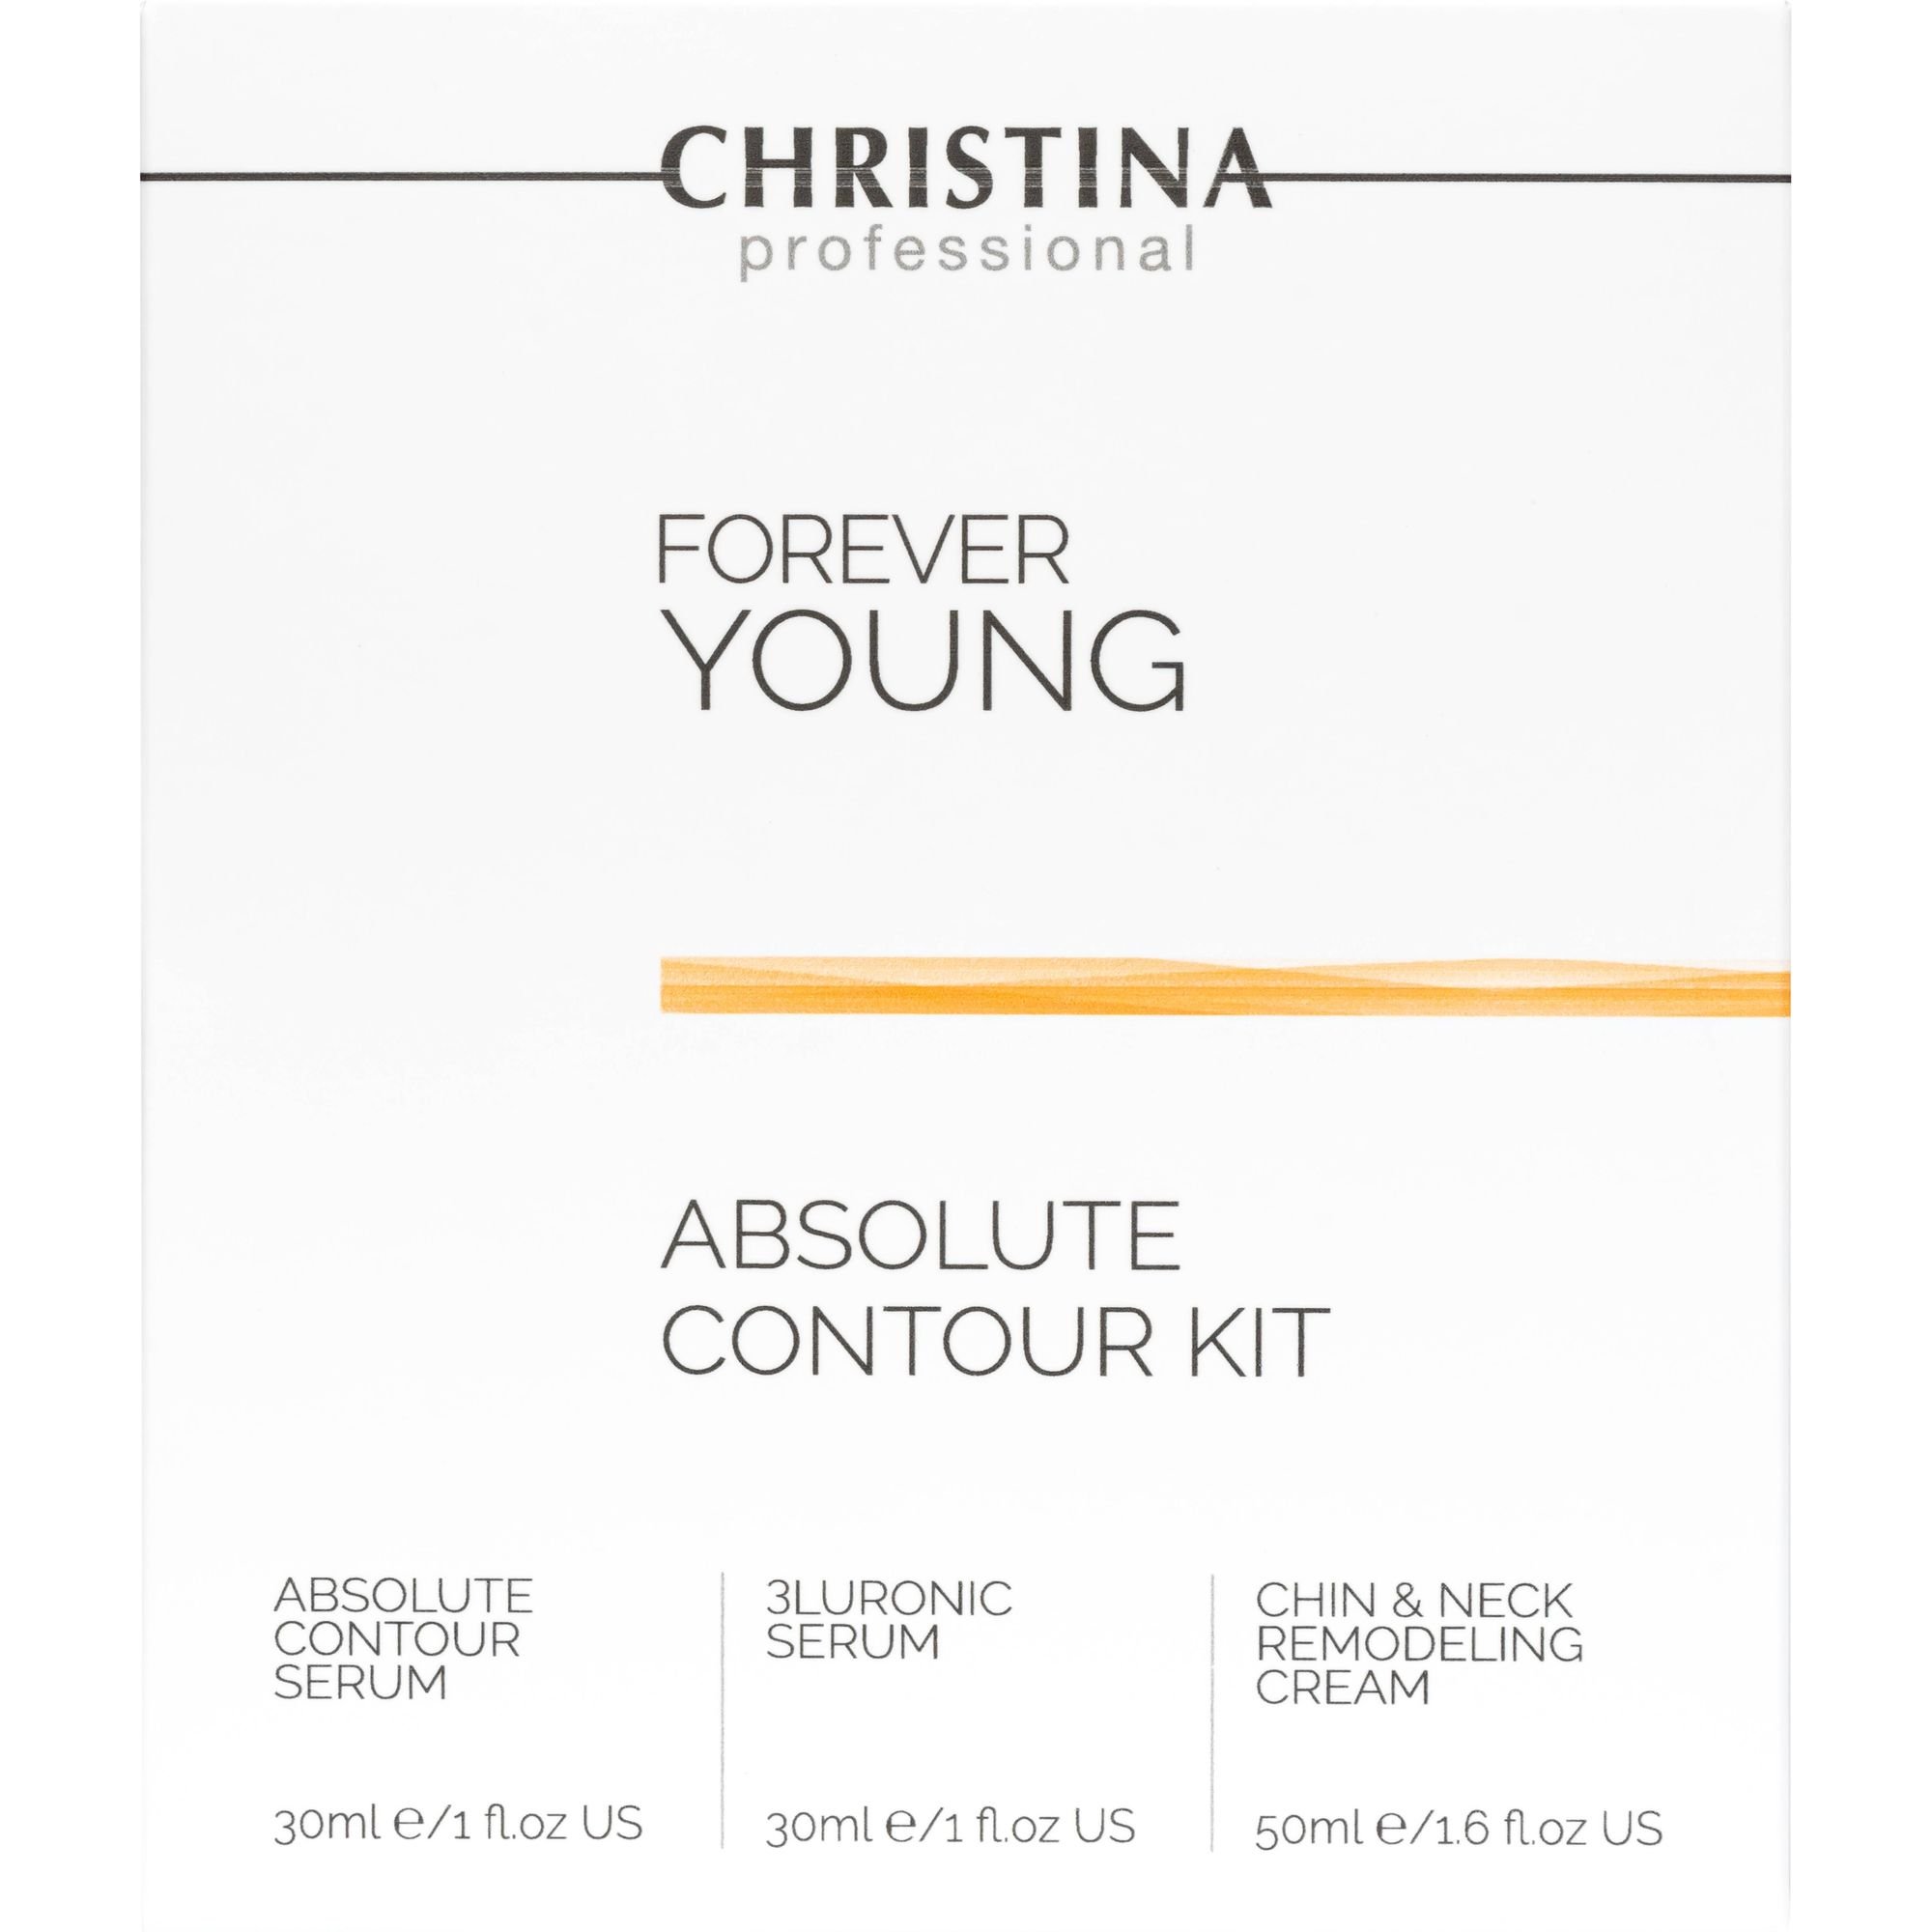 Набор Christina Forever Young Absolute Contour Kit: Absolute Contour Serum 30 мл + 3Luronic Serum 30 мл + Chin & Neck Remodeling Cream 50 мл - фото 2